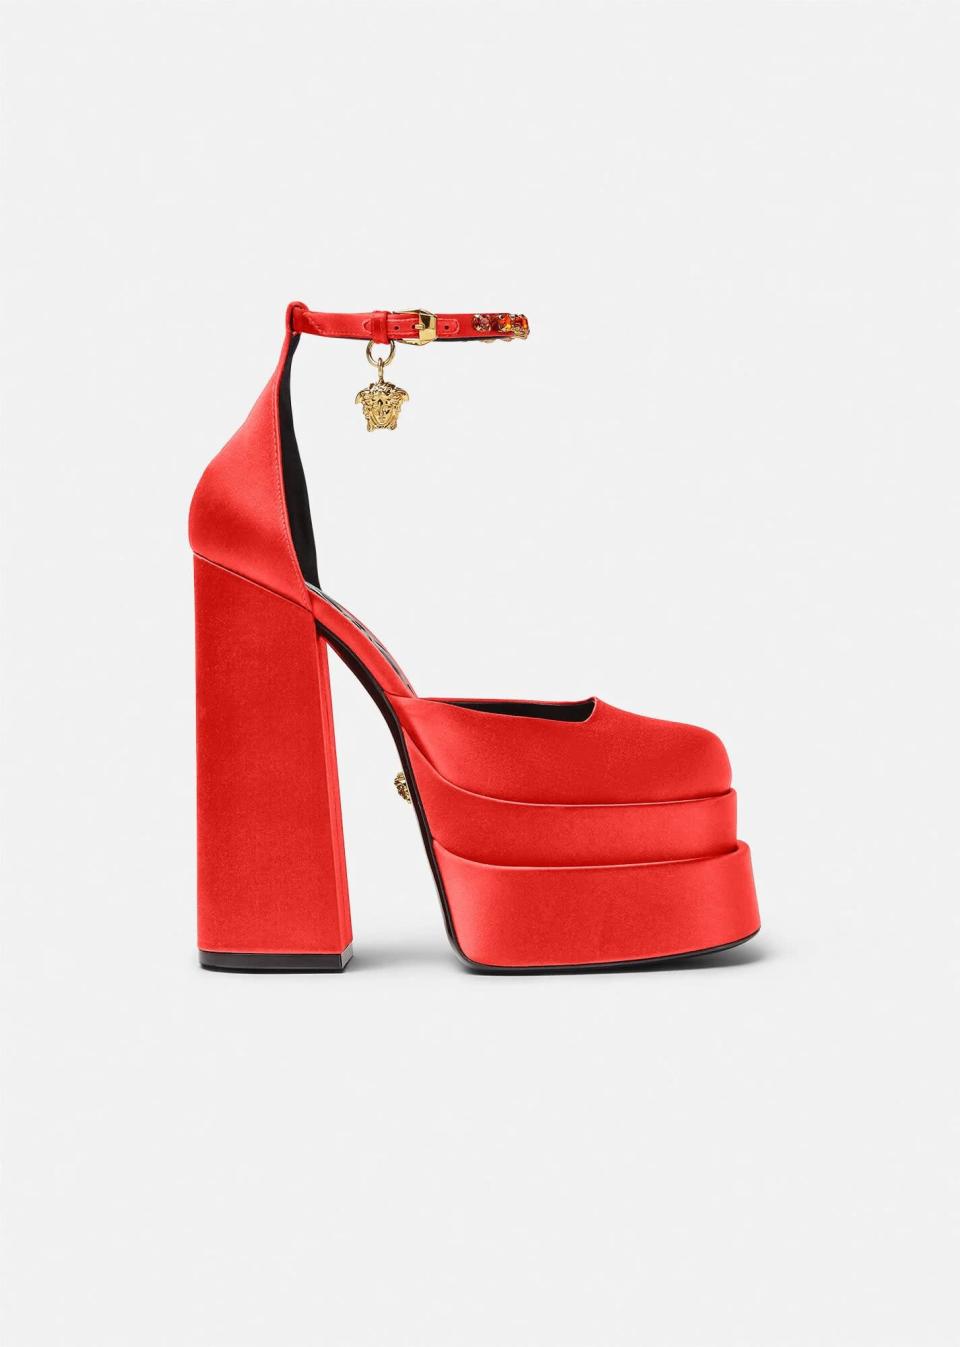 <p>The <span>Versace Medusa Aevitas Platform Pumps</span> ($1,575) come in many different colors, including black, lilac, fuchsia, pink, rose gold, red, light blue, and yellow. They're the celebrity favorite style, worn most frequently with a minidress or classic denim. </p>